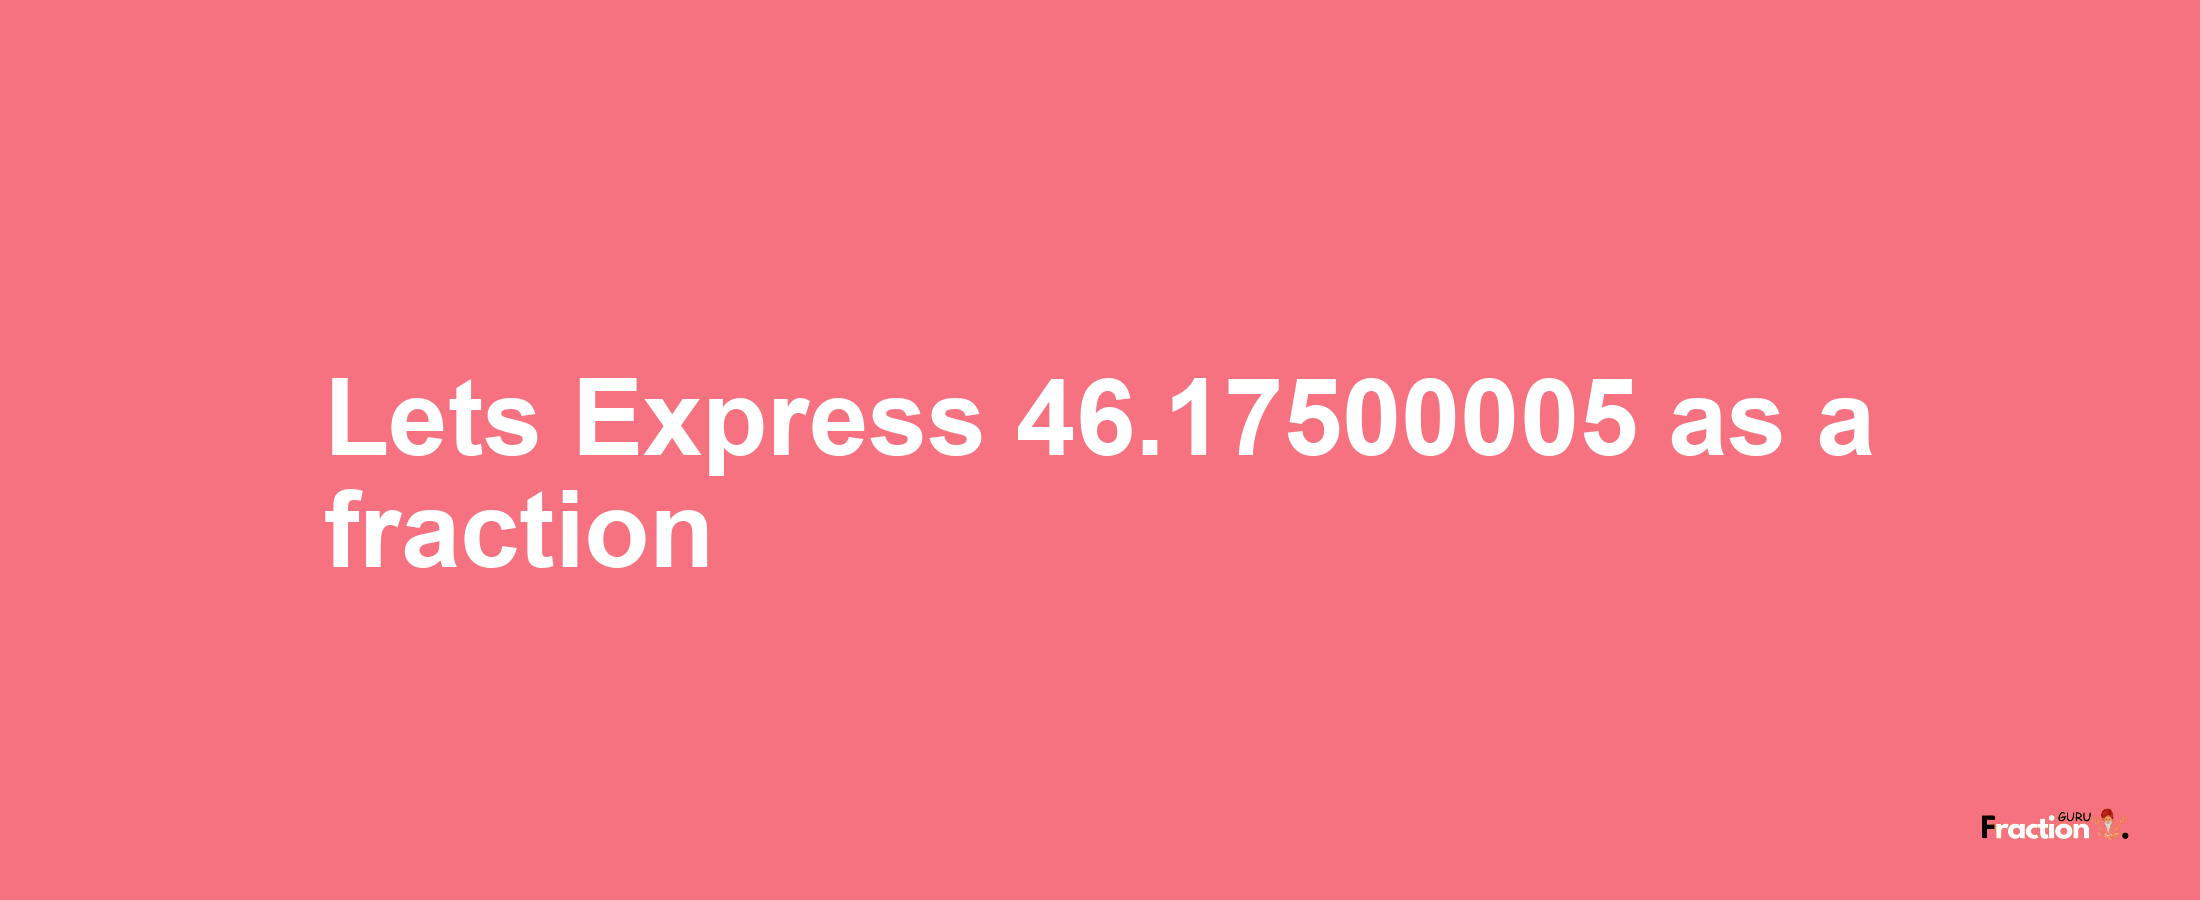 Lets Express 46.17500005 as afraction